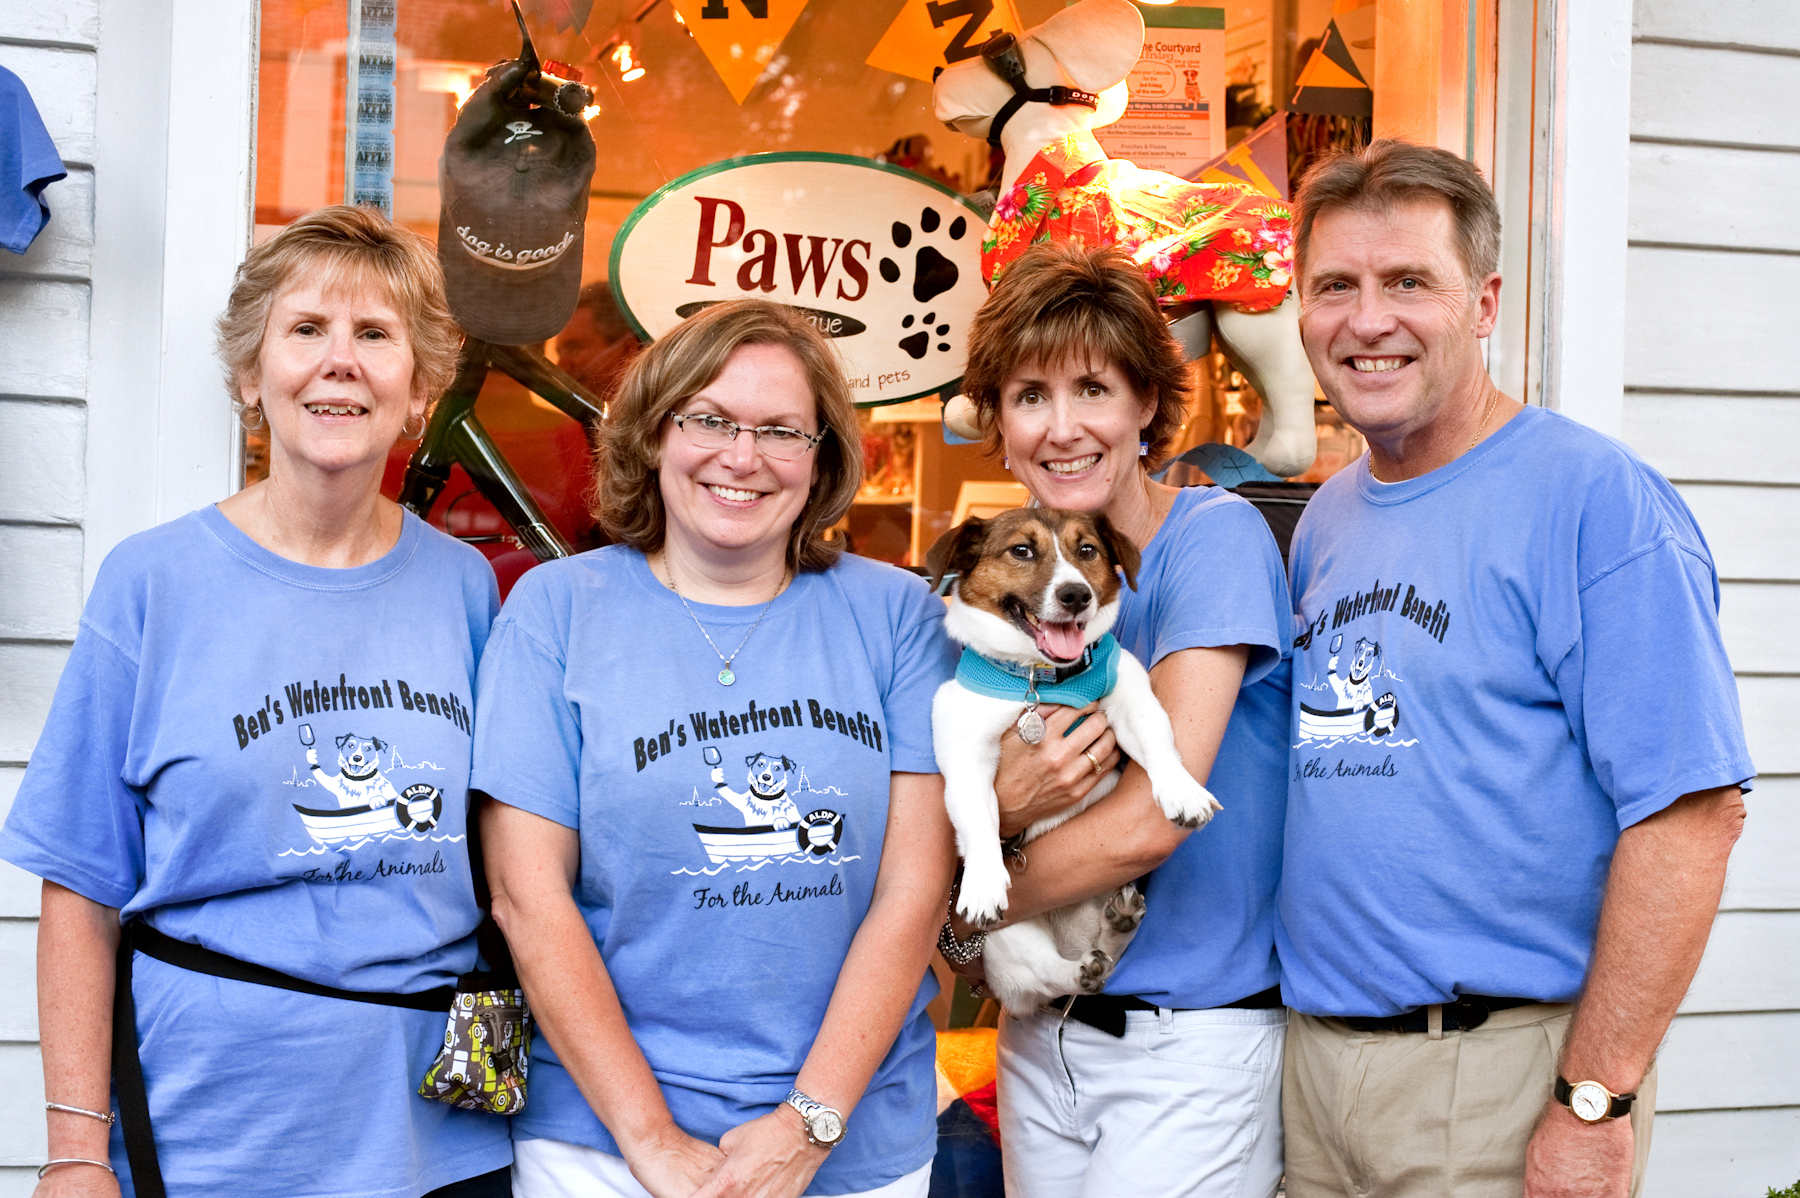 Bens Benefit Shirts Give Back to the Animals